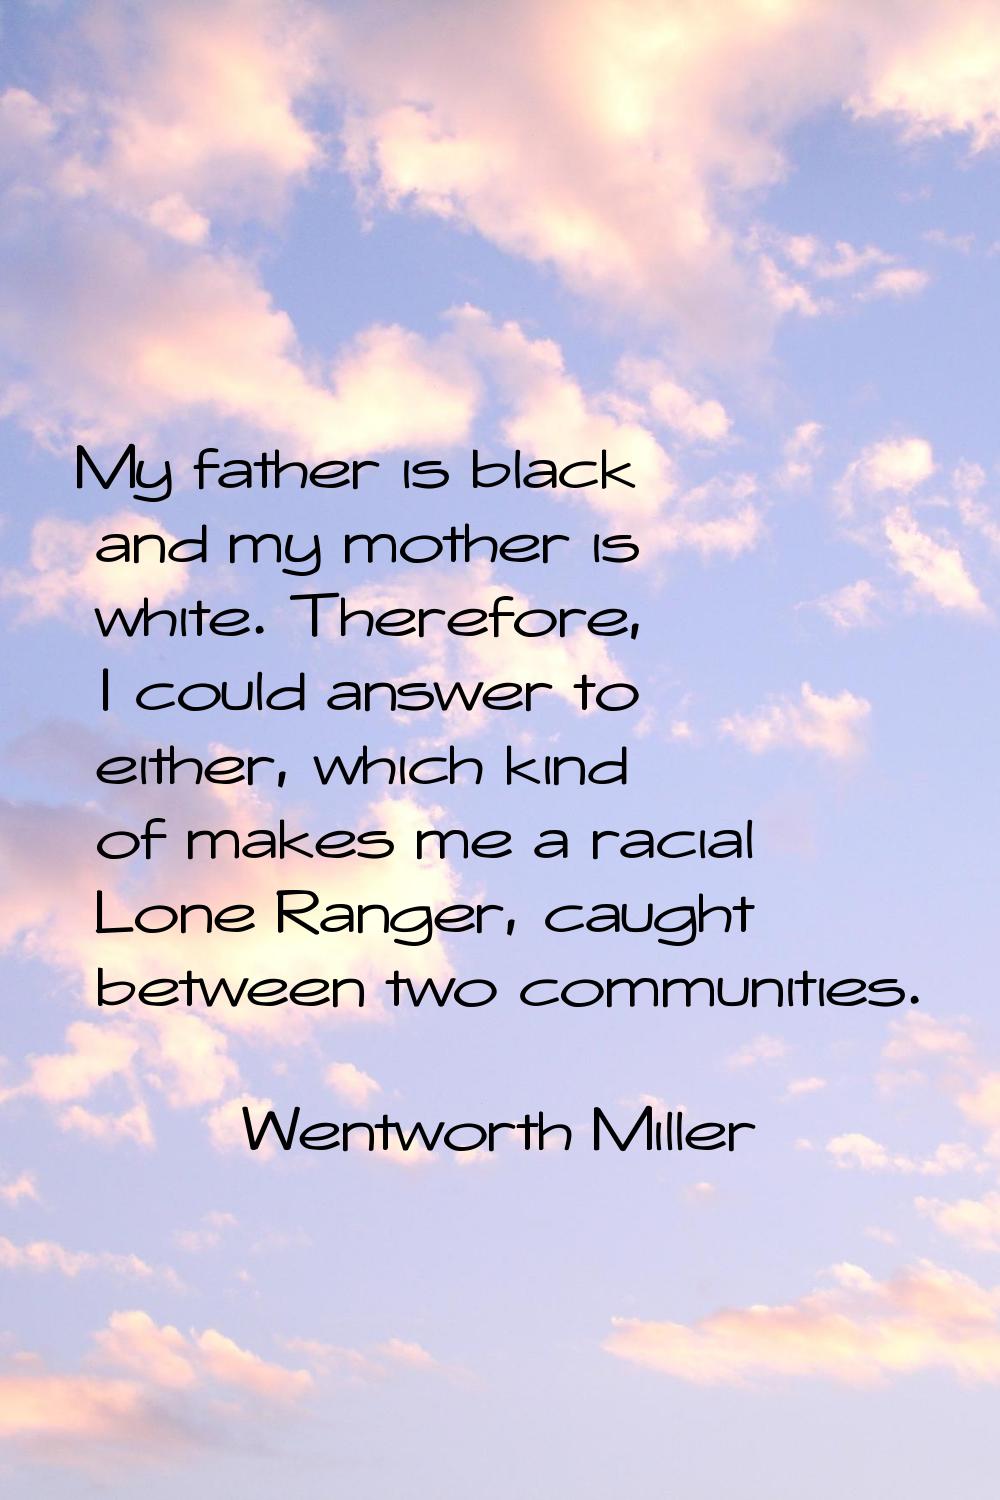 My father is black and my mother is white. Therefore, I could answer to either, which kind of makes